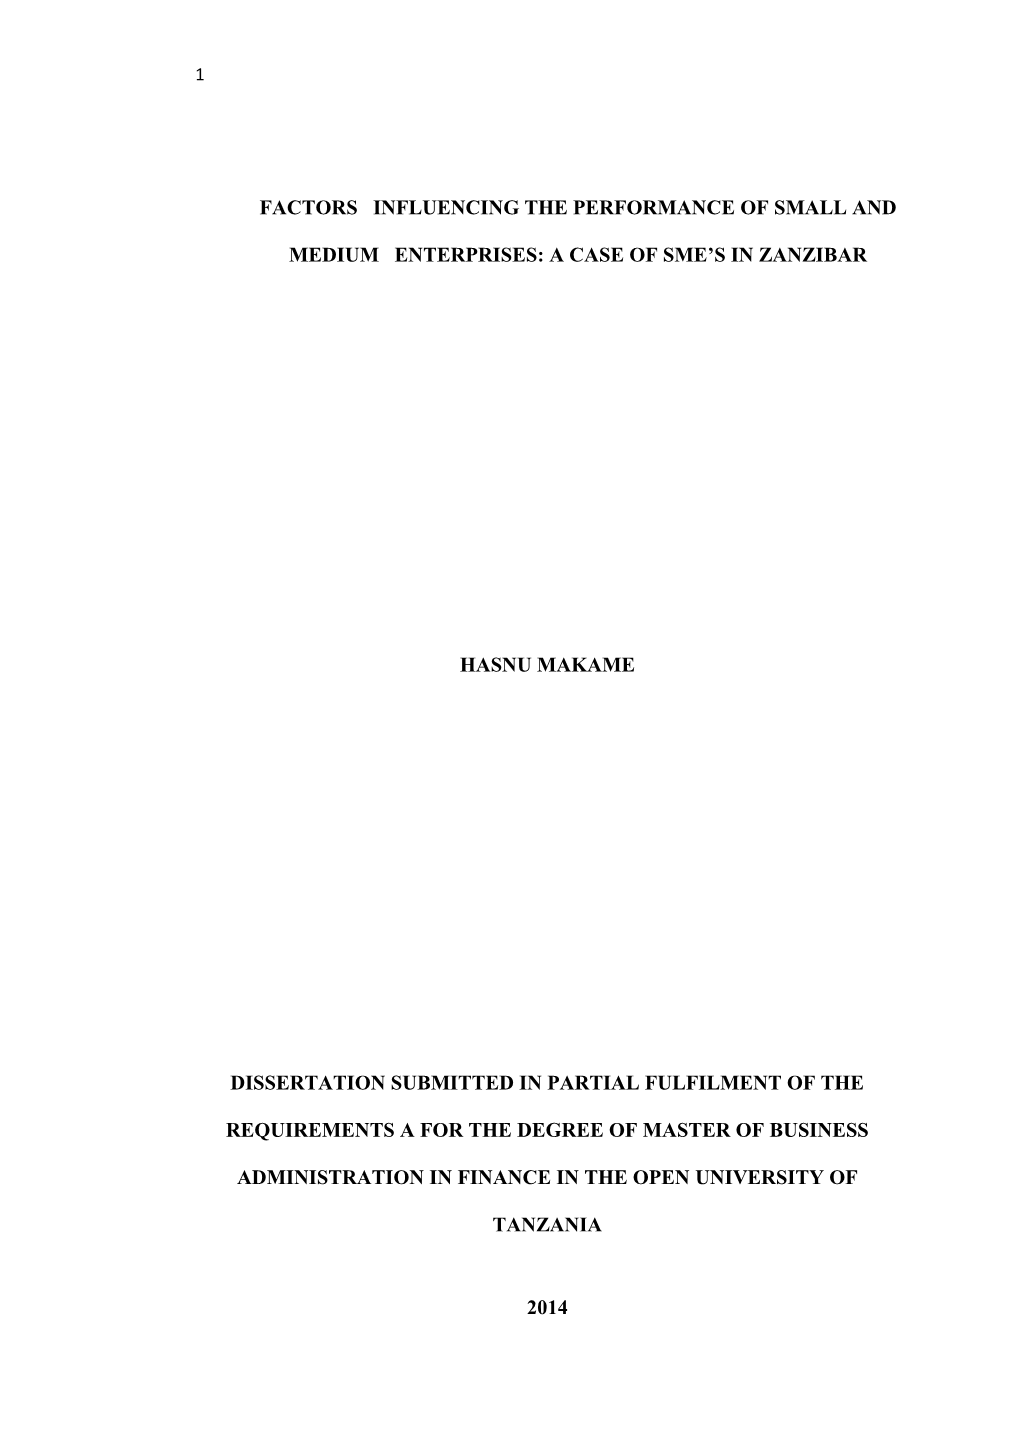 Dissertation Submitted in Partial Fulfilment of the Requirements a for the Degree of Master